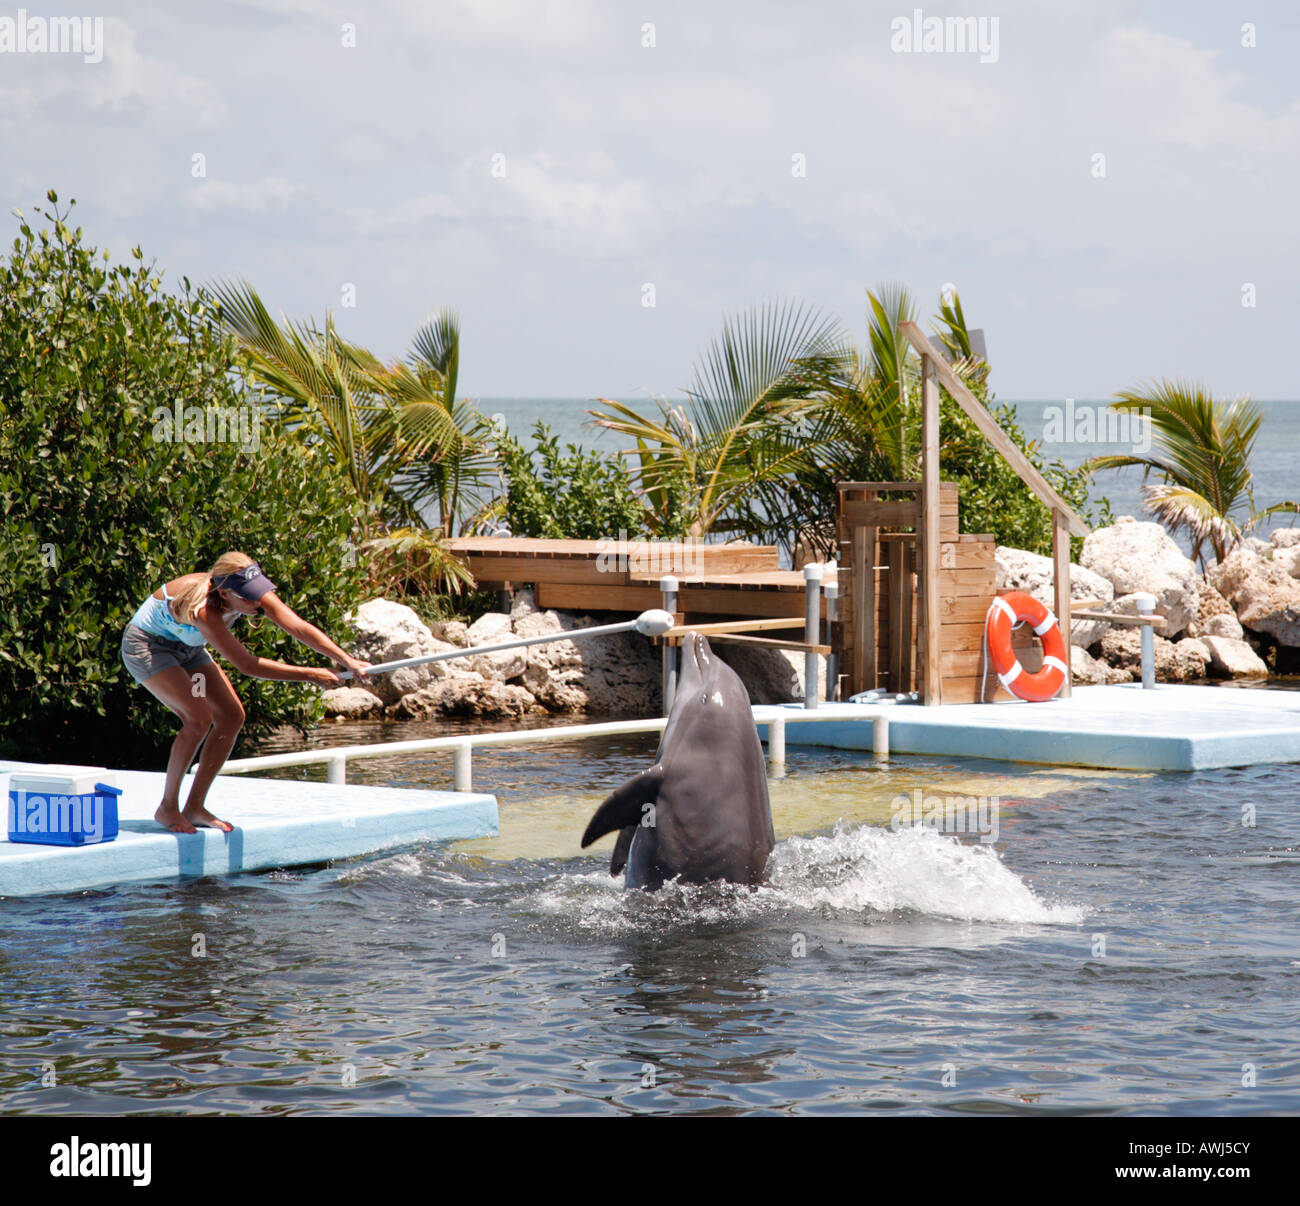 Dolphin trainer at work at the Dolphin Research Centre at the Keys in Florida USA Stock Photo